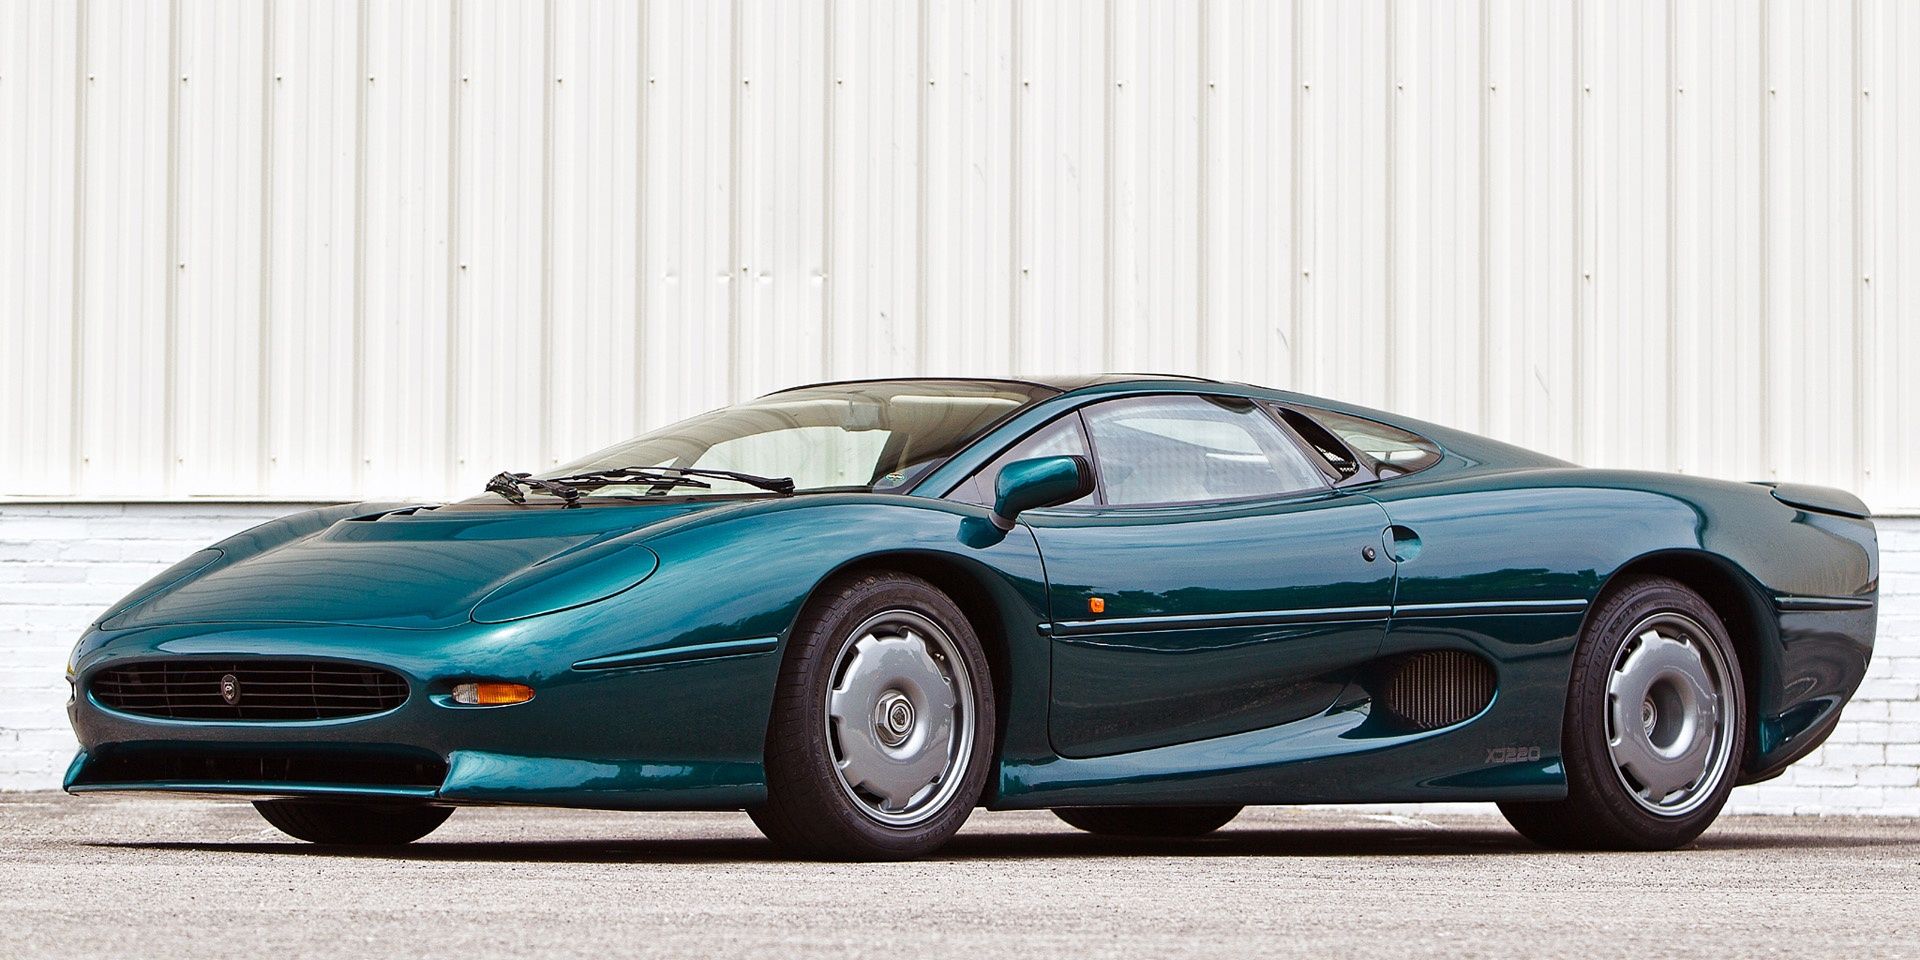 An oceanic green 1992 Jaguar XJ220 parked and pictured against a white backdrop